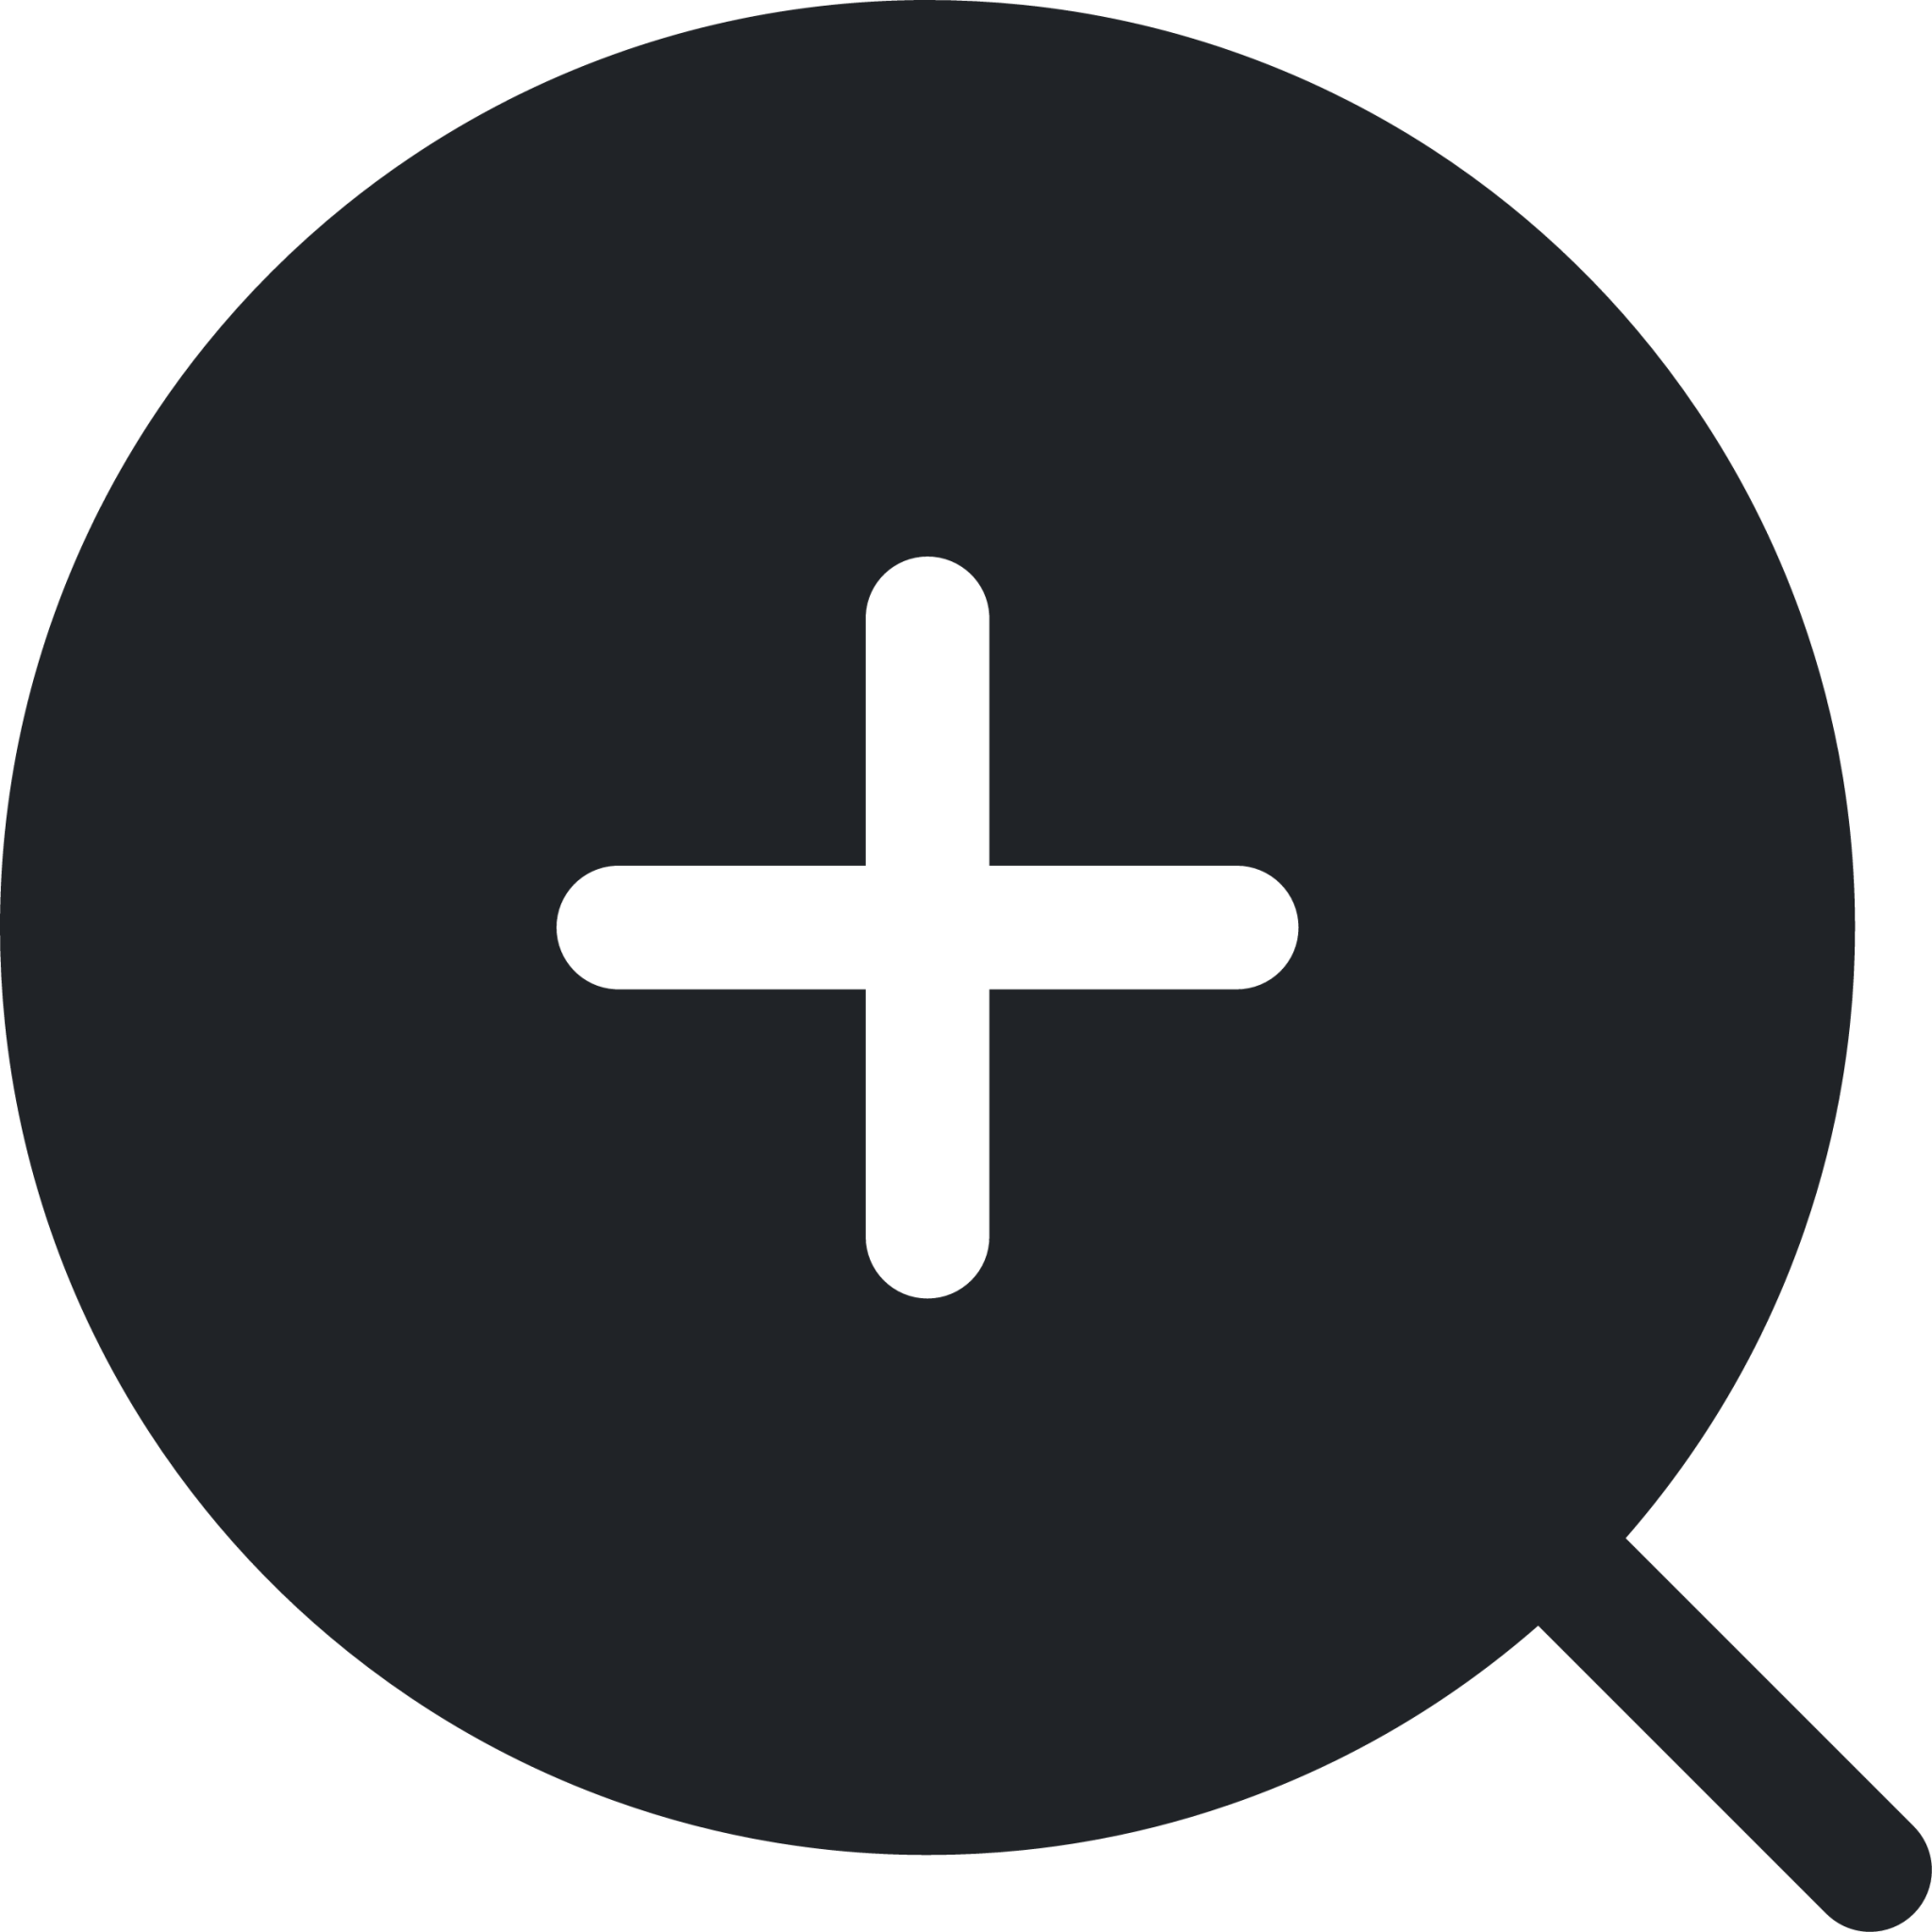 magnifier (rounded filled) icon